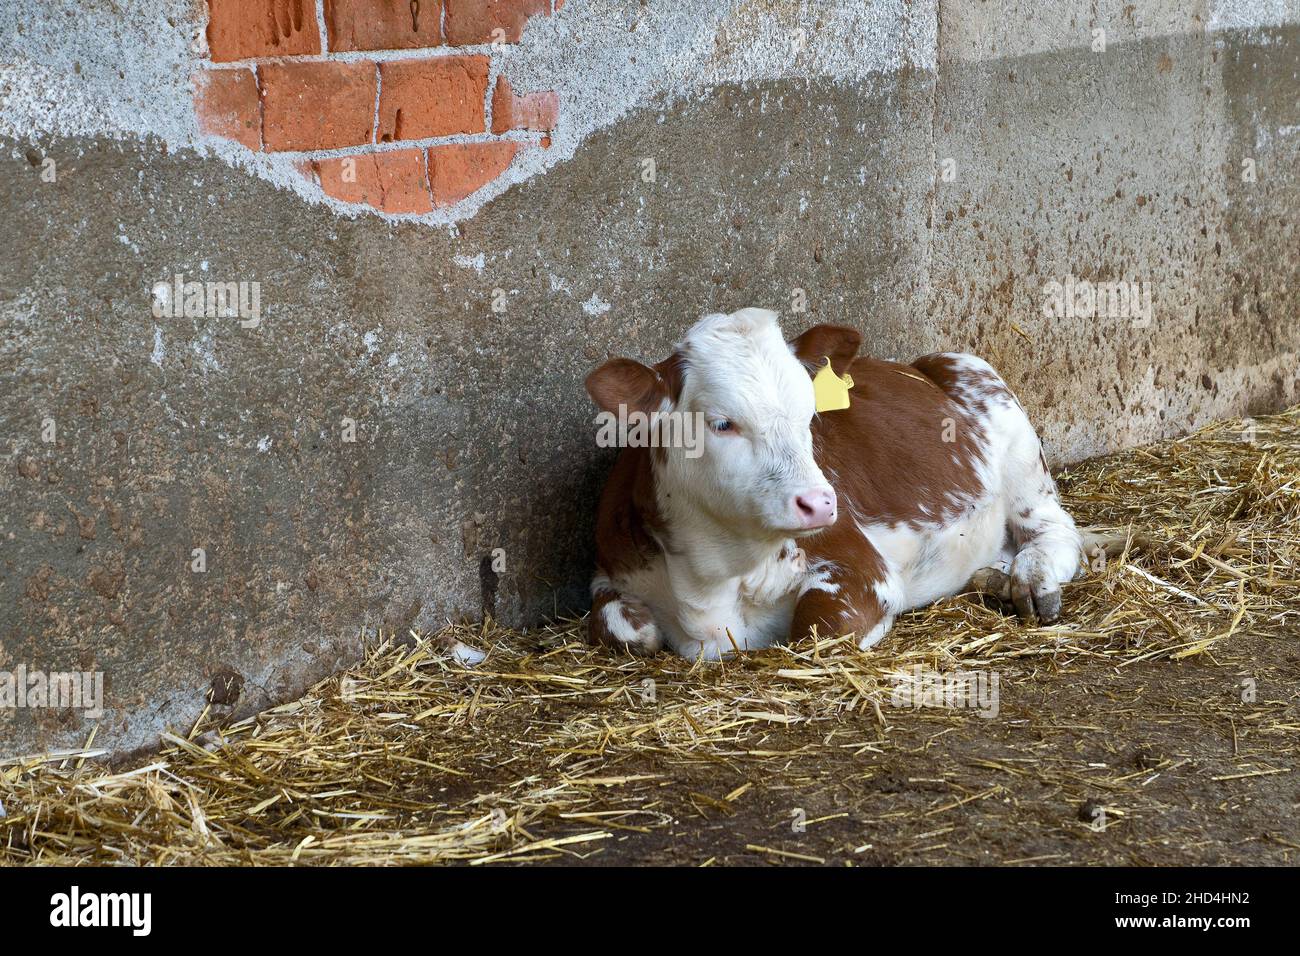 Calf lying in stable with brick wall in background Stock Photo